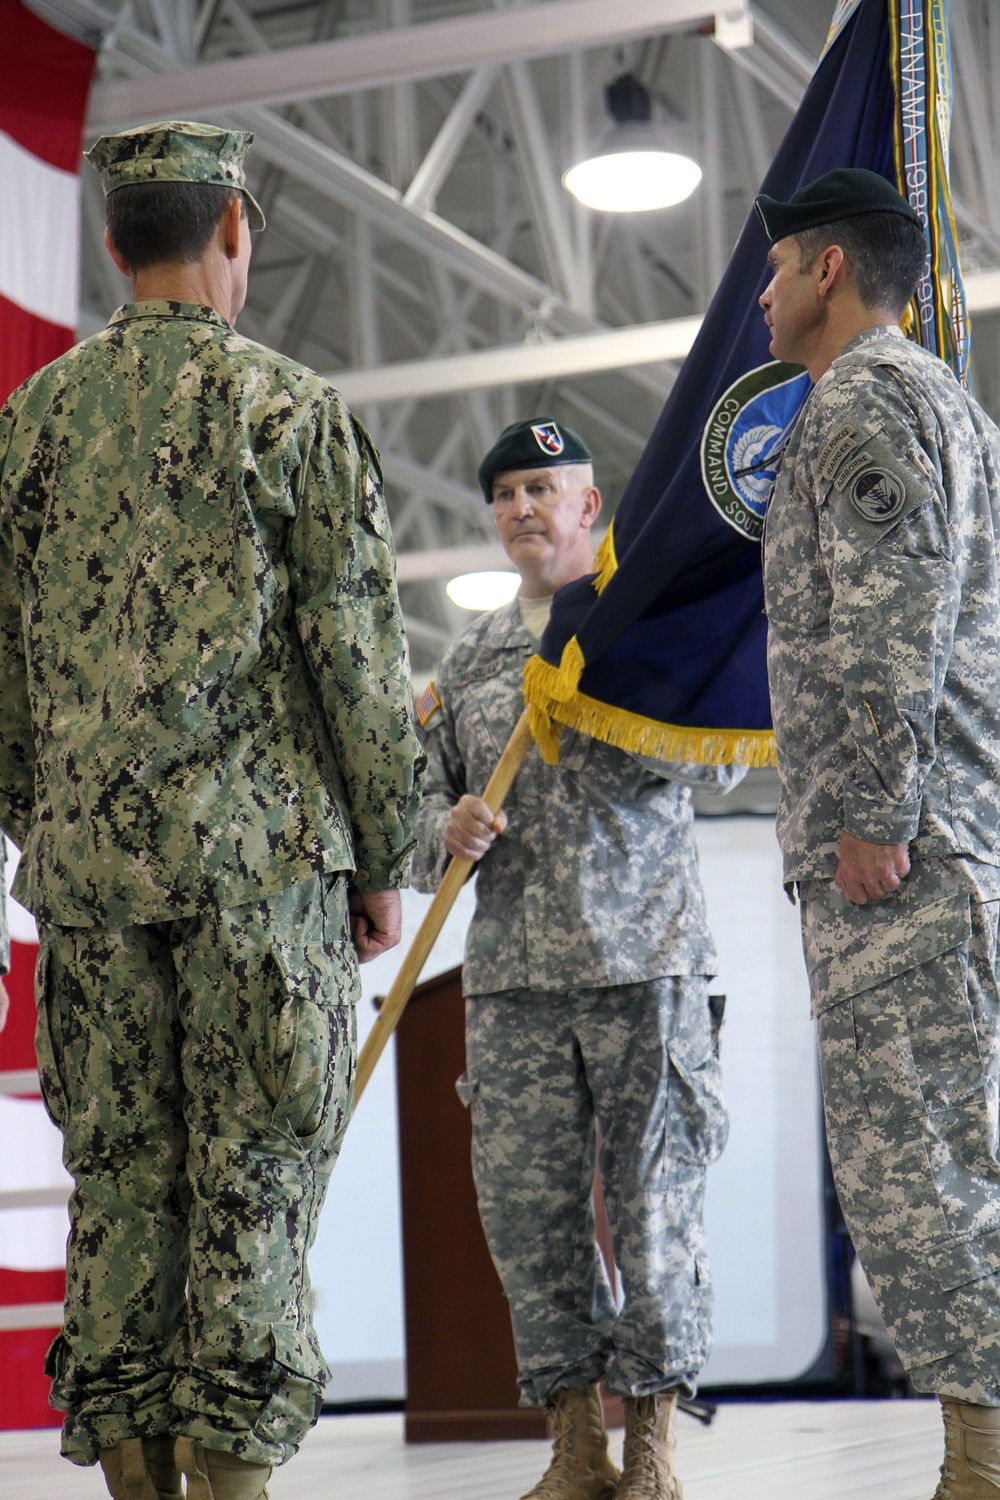 New commander takes charge of Special Operations Command South during ceremony